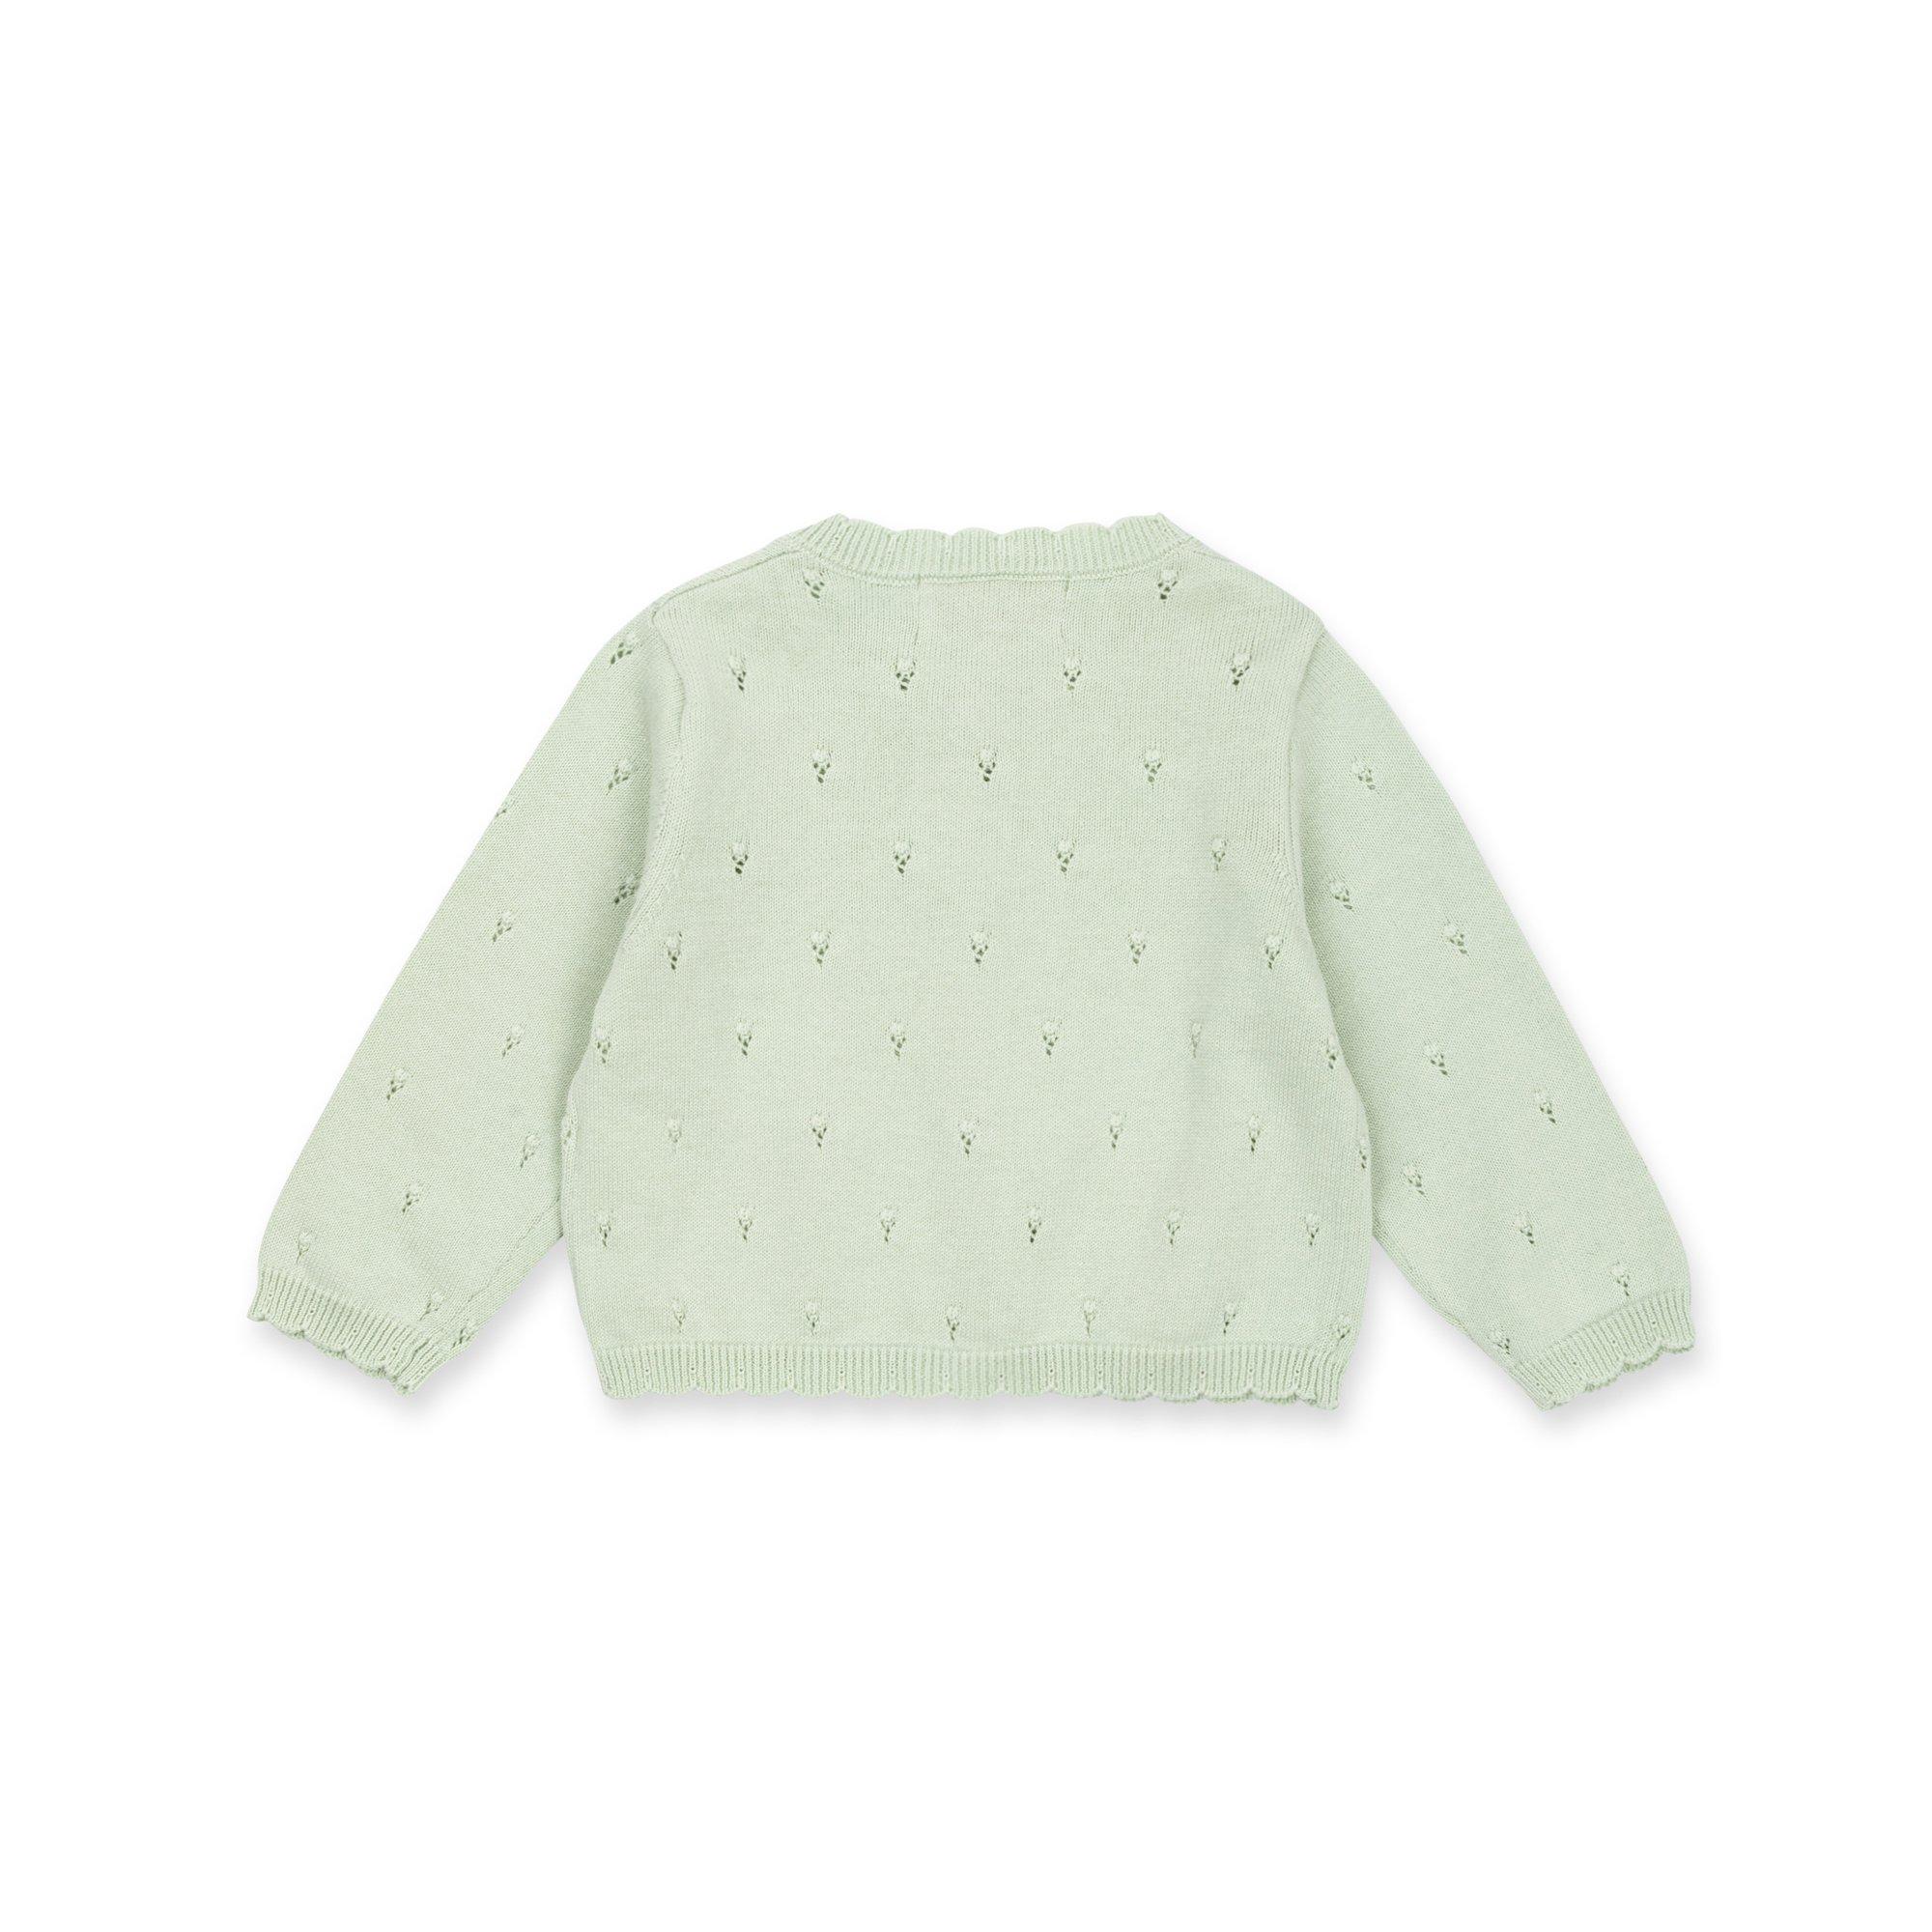 Manor Baby  Cardigan, manches longues 